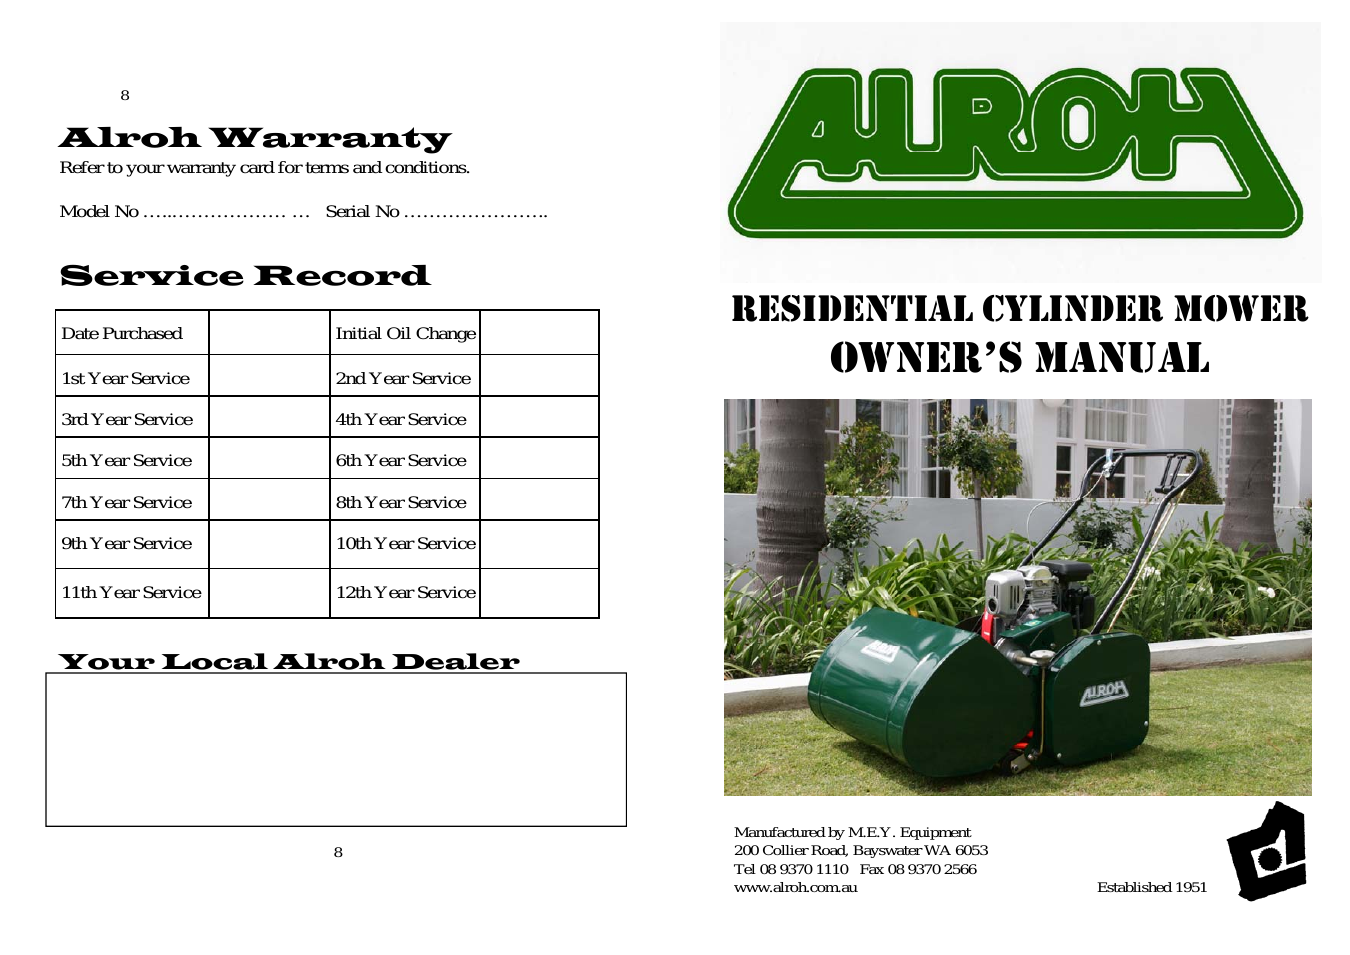 Residential Cylinder Mower